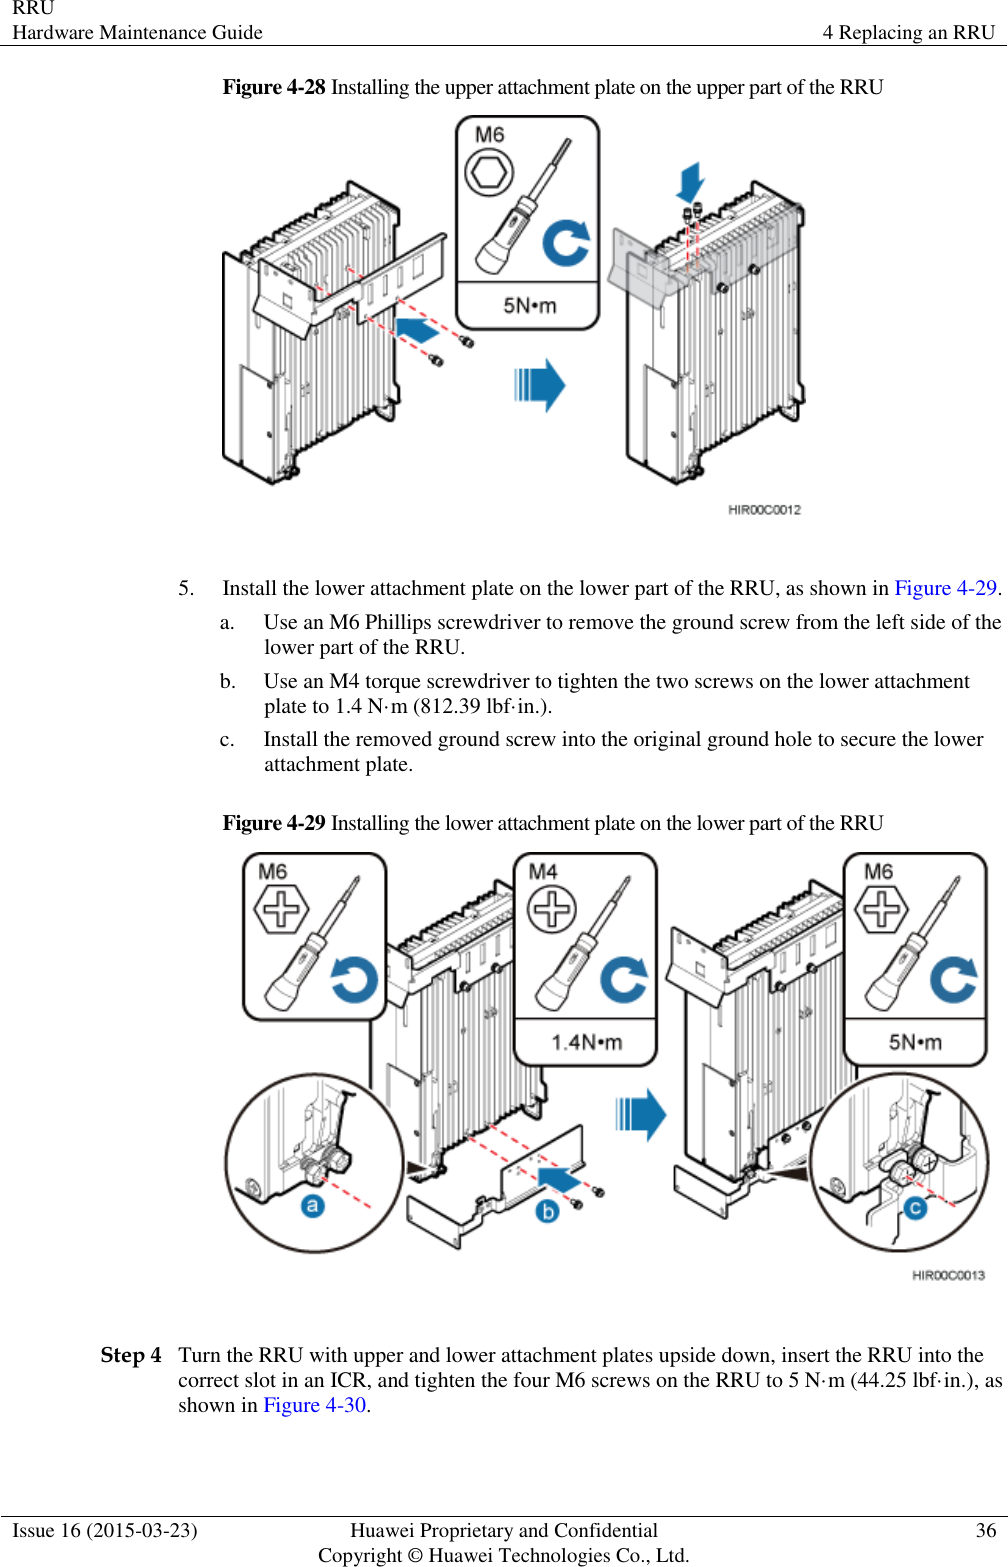 RRU Hardware Maintenance Guide 4 Replacing an RRU  Issue 16 (2015-03-23) Huawei Proprietary and Confidential                                     Copyright © Huawei Technologies Co., Ltd. 36  Figure 4-28 Installing the upper attachment plate on the upper part of the RRU   5. Install the lower attachment plate on the lower part of the RRU, as shown in Figure 4-29. a. Use an M6 Phillips screwdriver to remove the ground screw from the left side of the lower part of the RRU.   b. Use an M4 torque screwdriver to tighten the two screws on the lower attachment plate to 1.4 N·m (812.39 lbf·in.). c. Install the removed ground screw into the original ground hole to secure the lower attachment plate. Figure 4-29 Installing the lower attachment plate on the lower part of the RRU   Step 4 Turn the RRU with upper and lower attachment plates upside down, insert the RRU into the correct slot in an ICR, and tighten the four M6 screws on the RRU to 5 N·m (44.25 lbf·in.), as shown in Figure 4-30.   